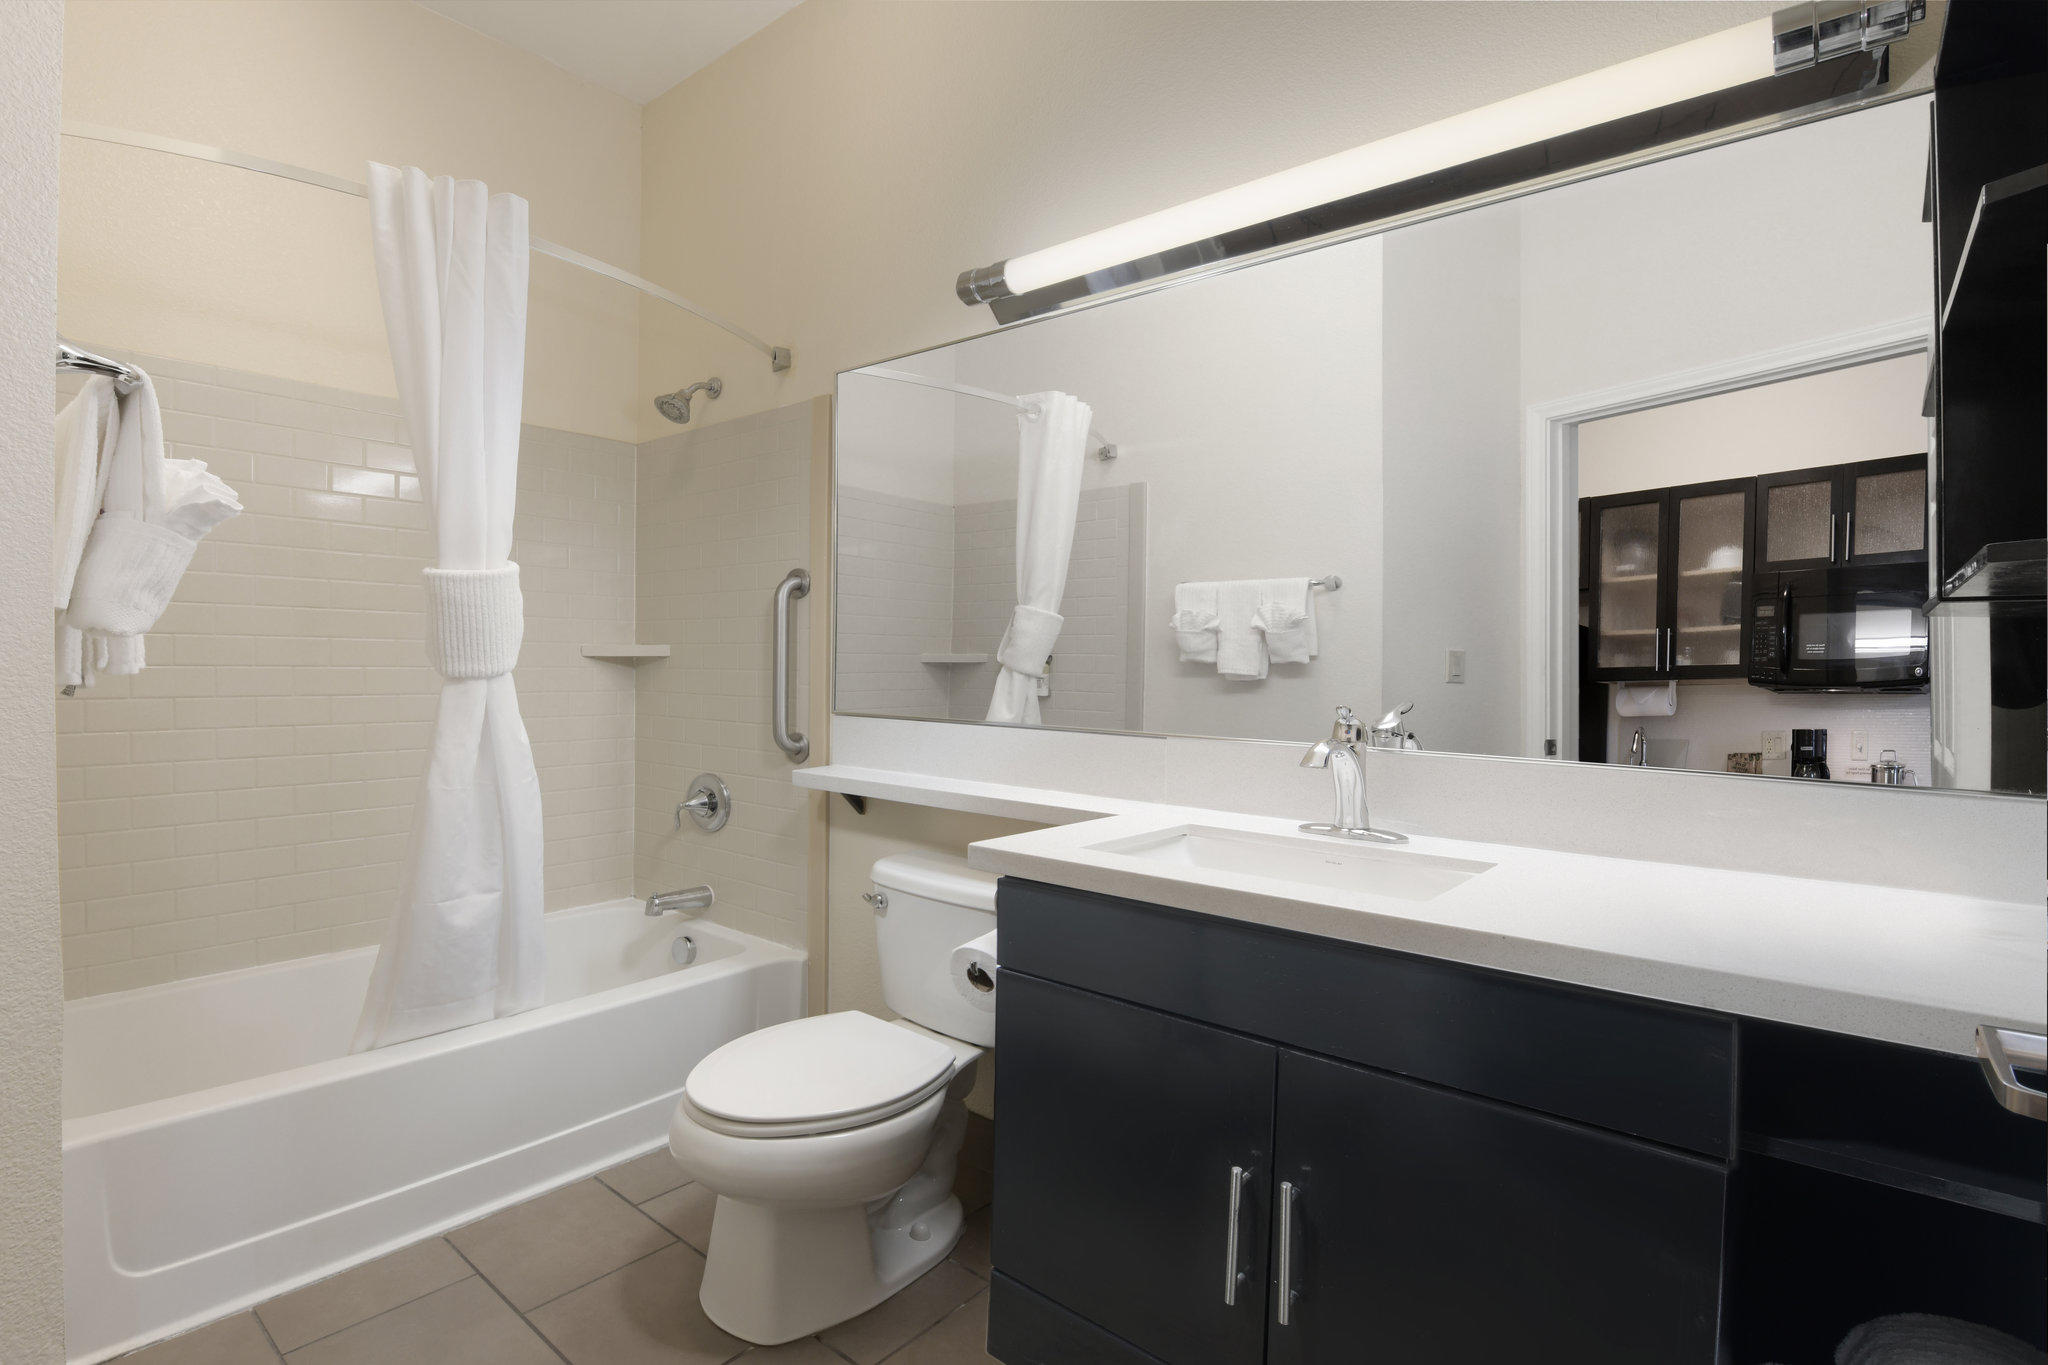 Candlewood Suites Odessa Photo